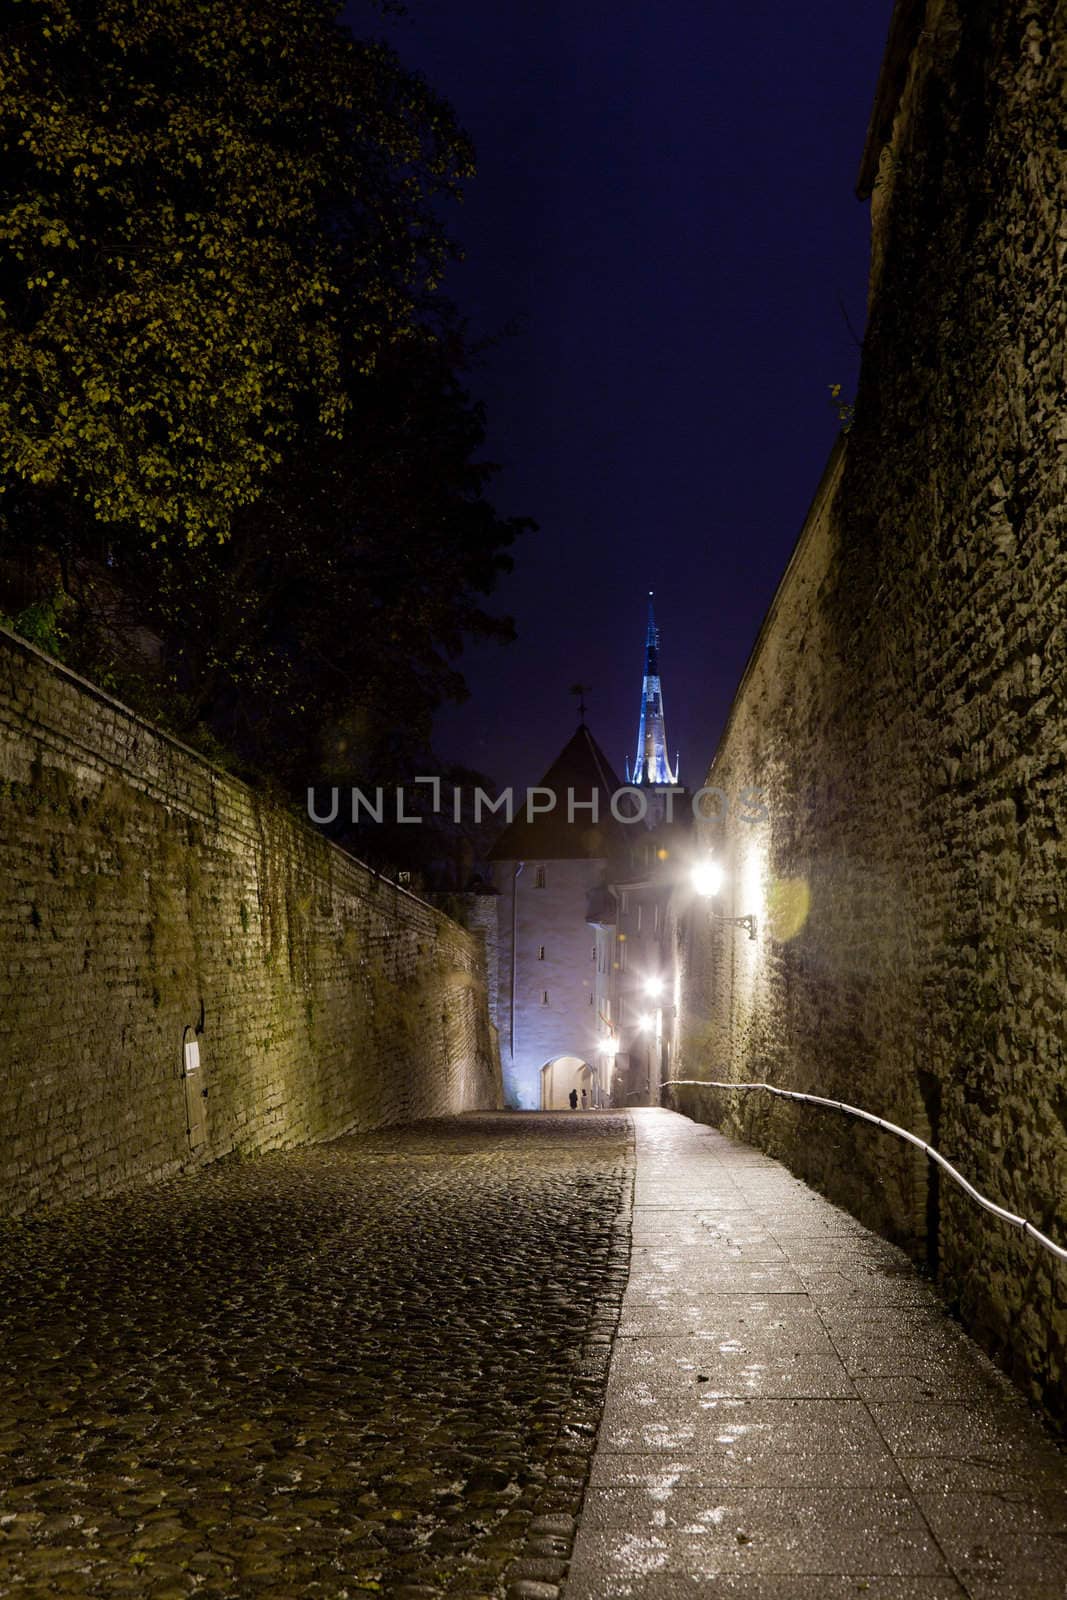 Walk to Toompea by steheap